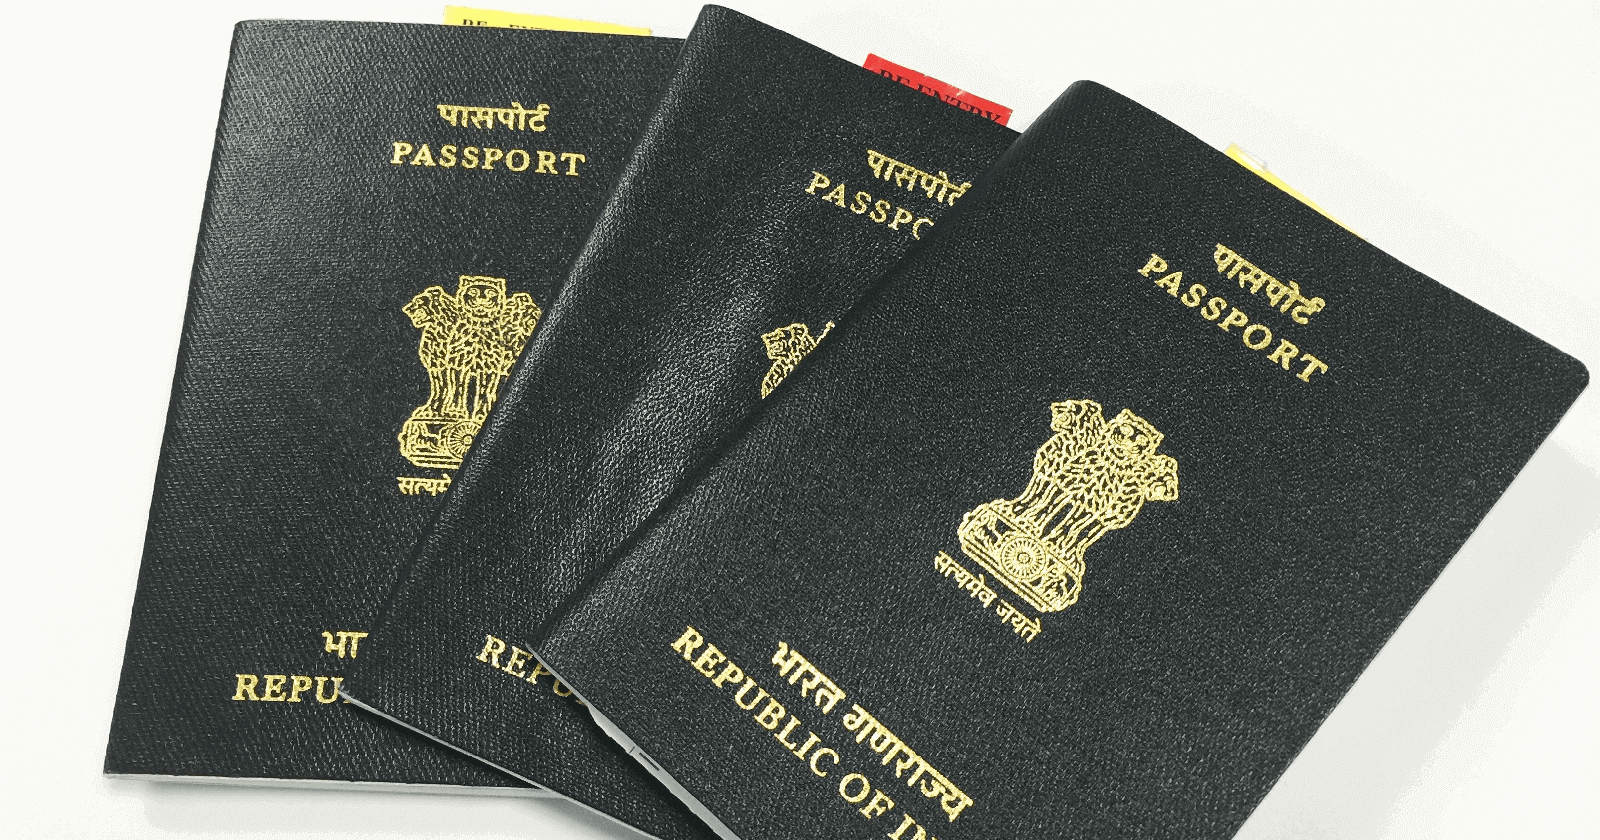 How Police Verification for Passport is Done in India